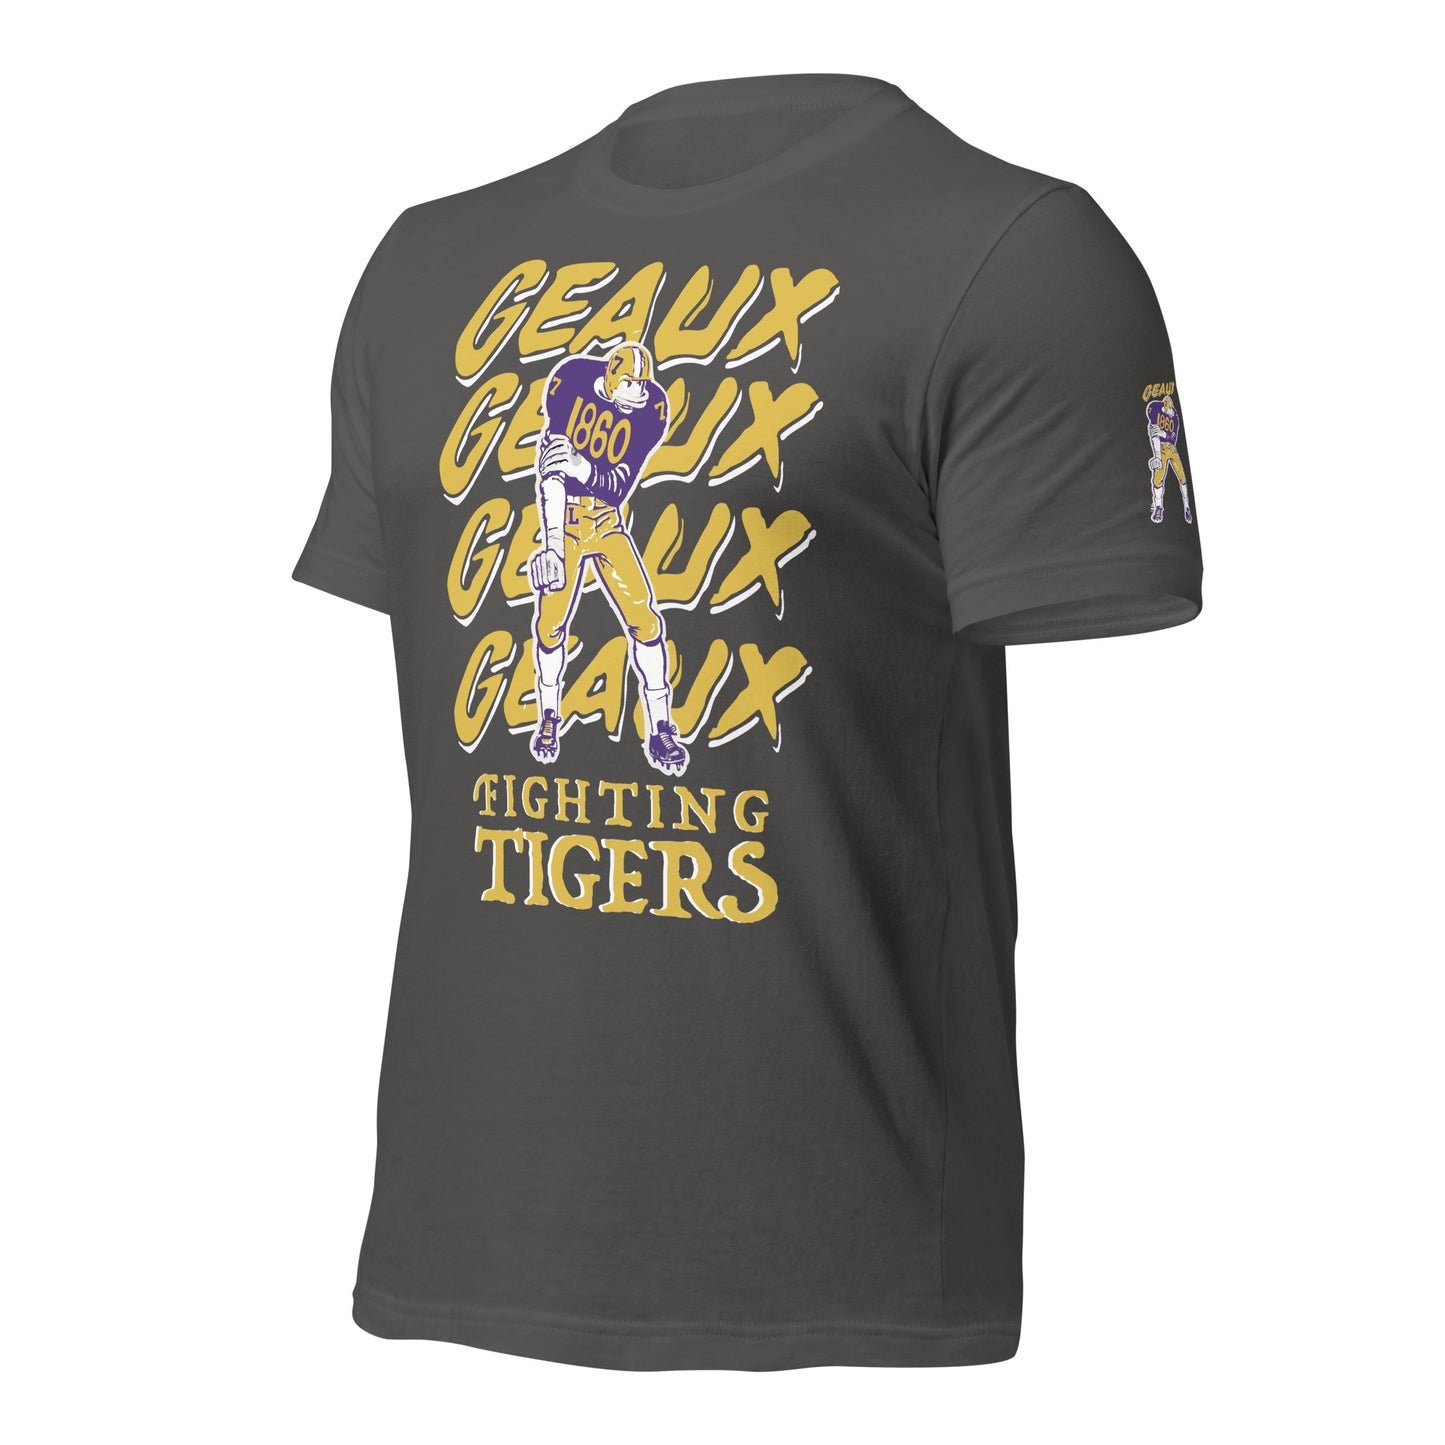 FIGHTING TIGERS 1860 FULL FRONT LOGO - BELLA+CANVAS - Unisex t-shirt